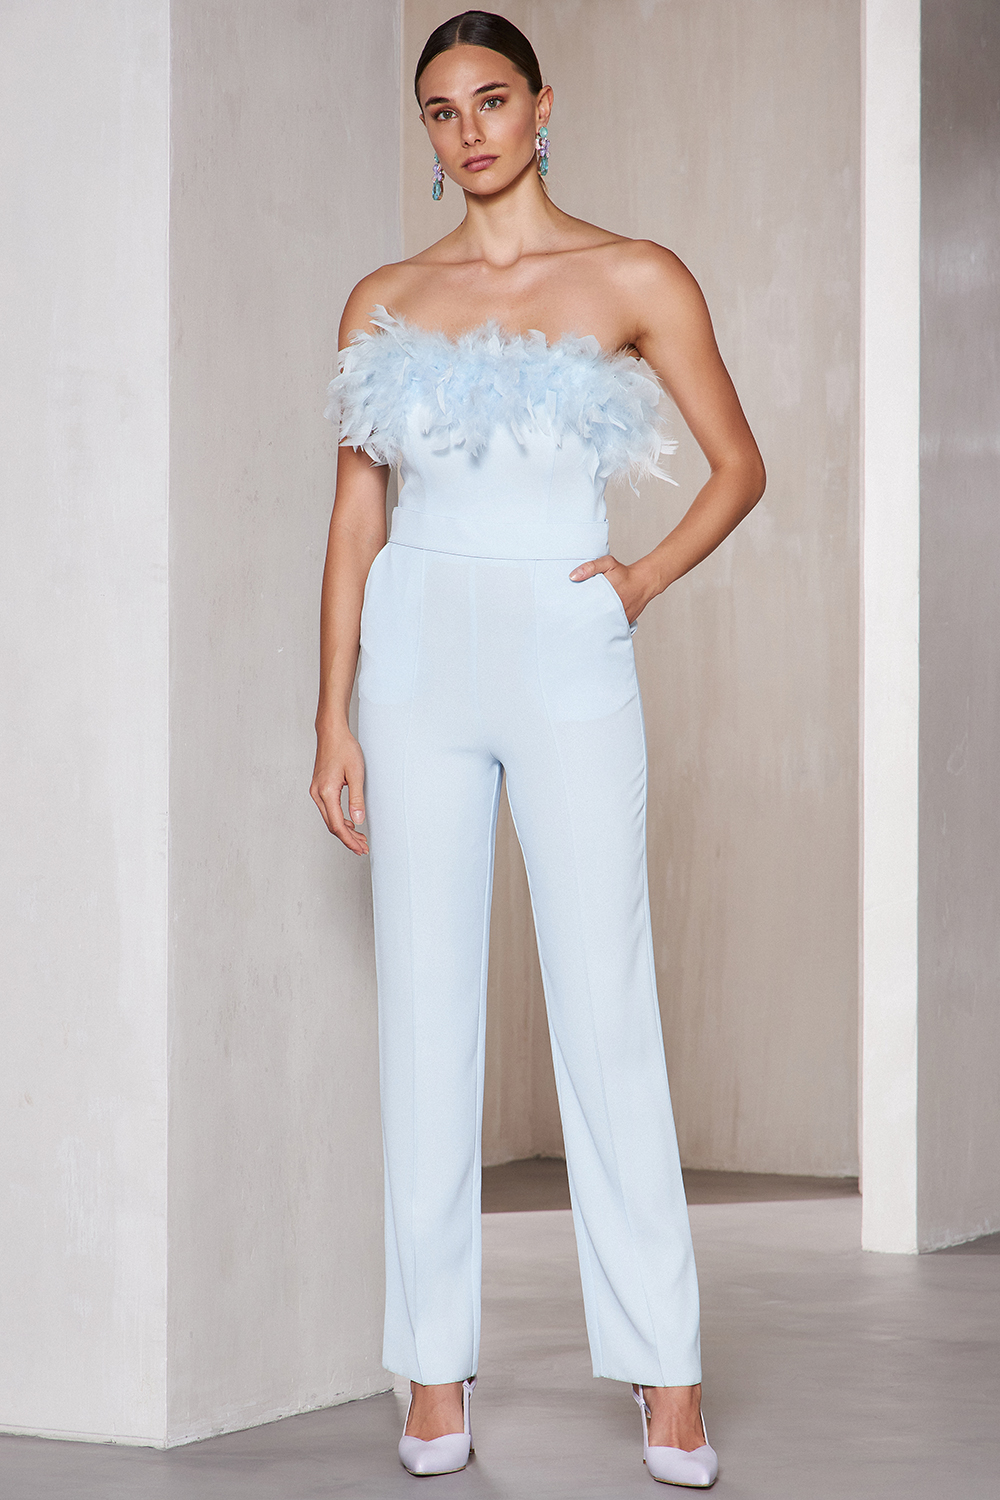 Коктейльные платья / Cocktail strapless jumpsuit with feathers at the top